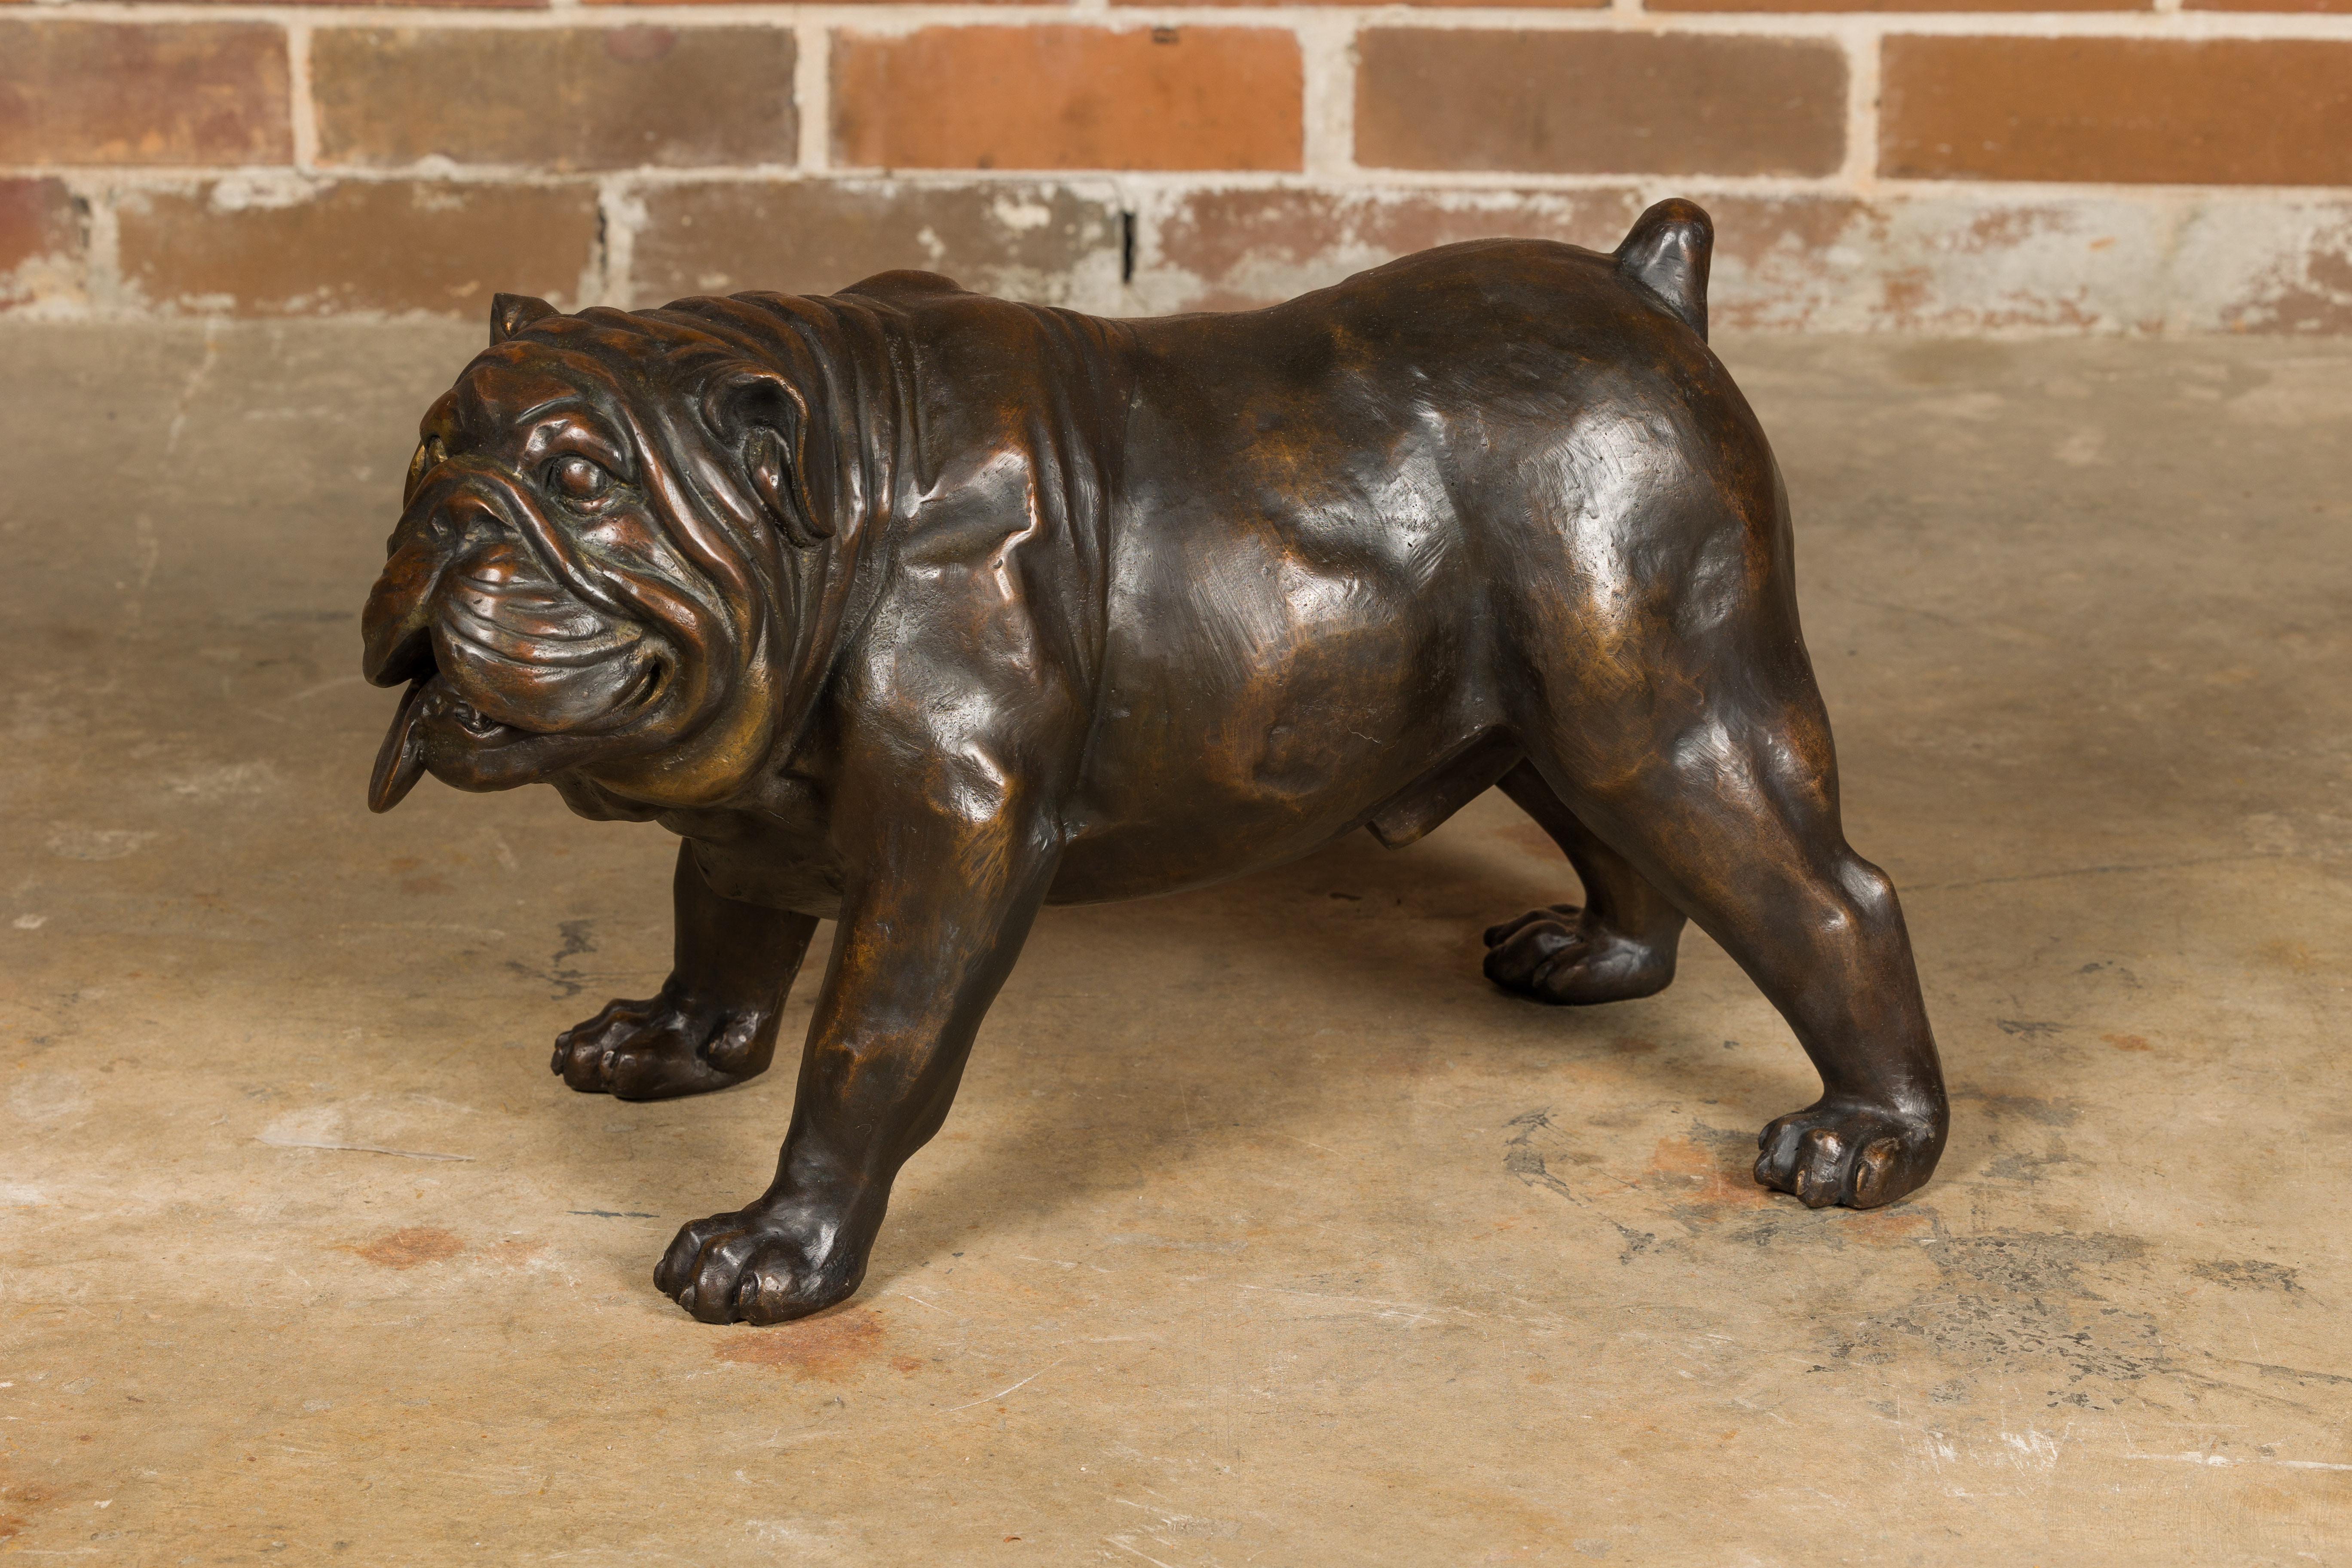 A vintage life-size bronze bulldog sculpture, American art. This vintage American art piece, a life-size bronze sculpture of a bulldog, exudes character and charm. The sculpture captures the essence of the beloved breed with incredible attention to